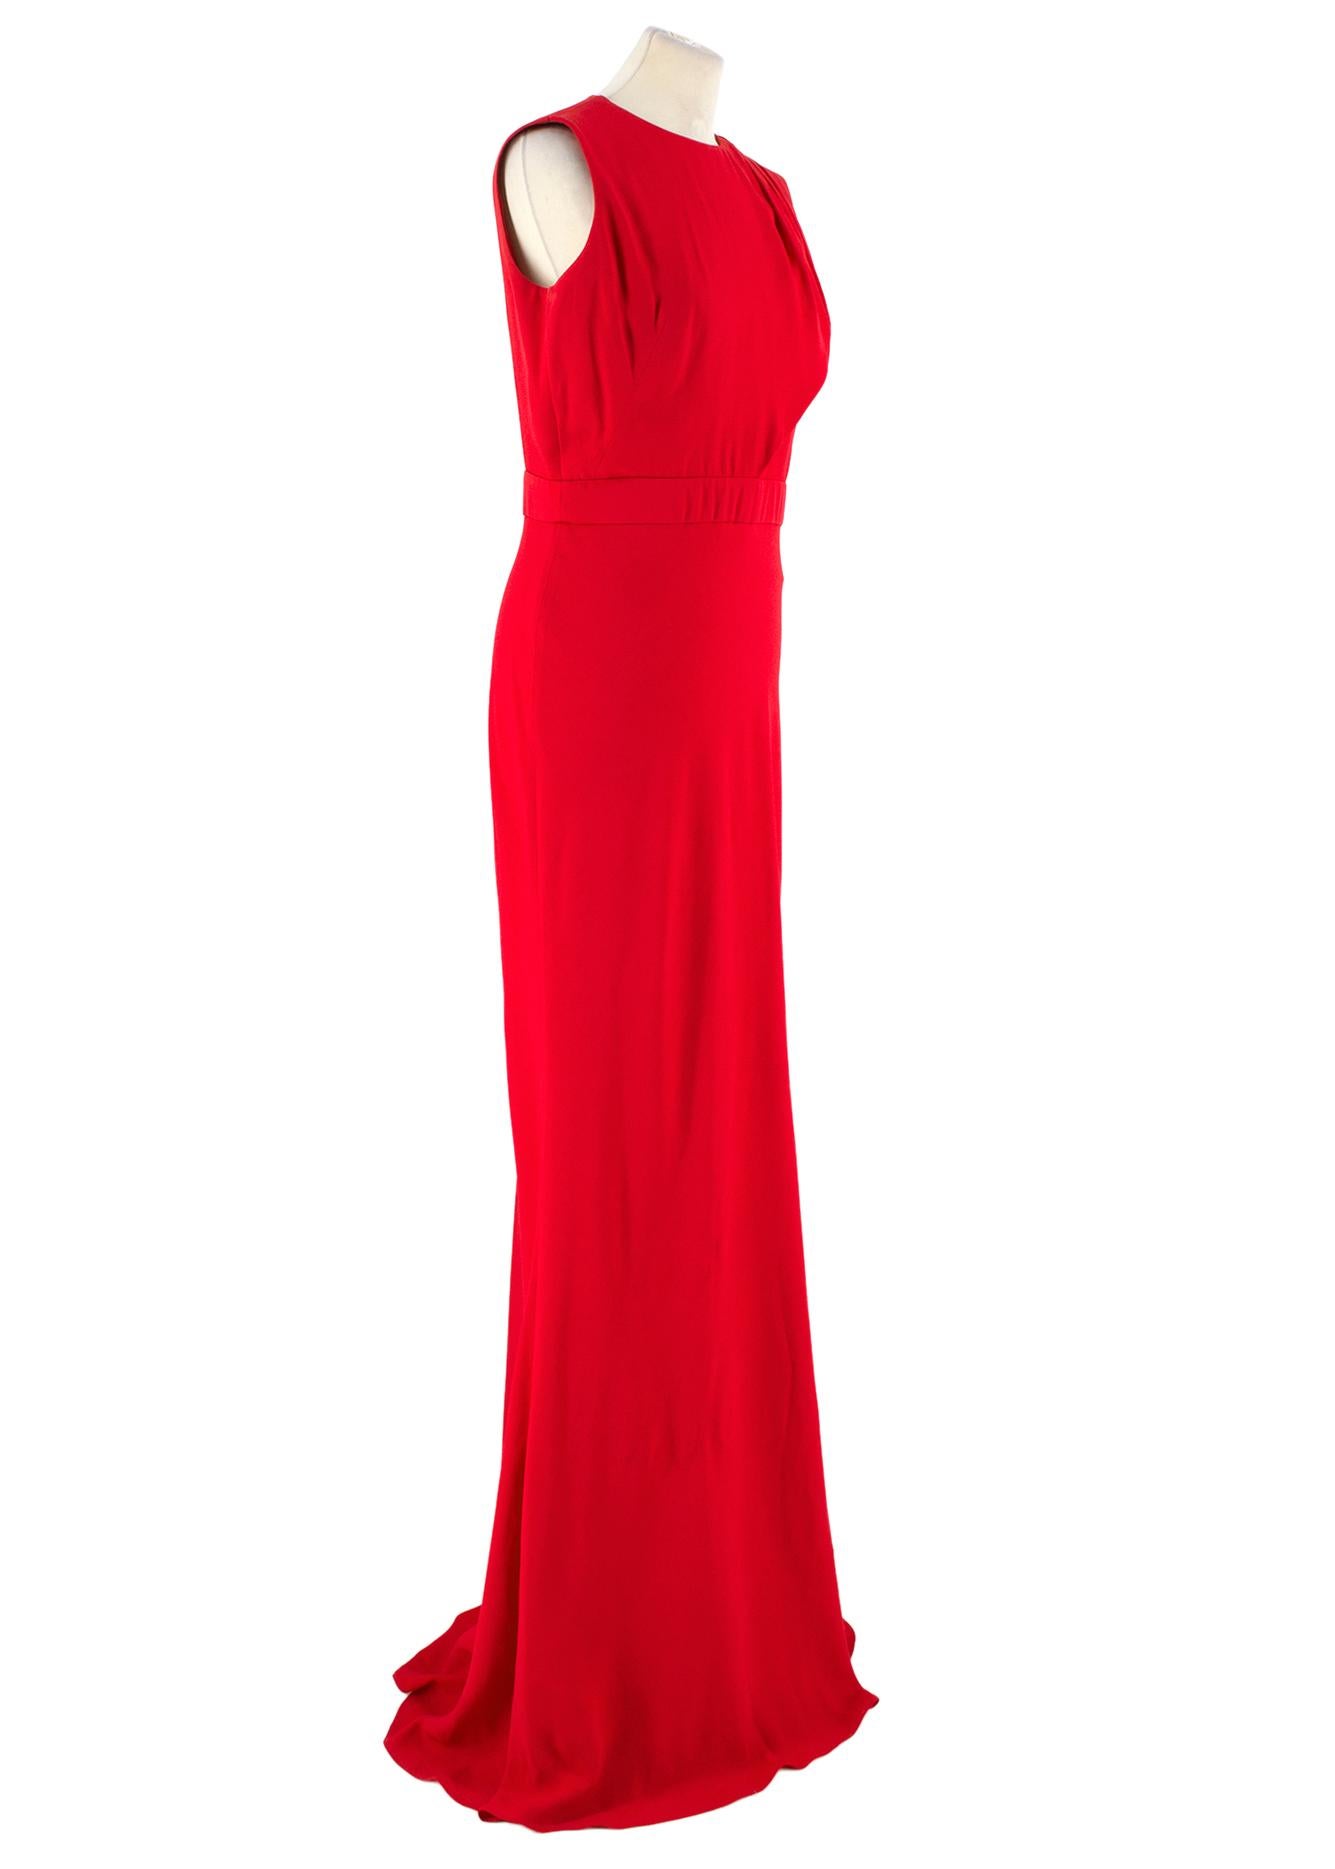 Alexander McQueen Draped Red Cutout Craped Gown

- Viscose Acetate
- Open back 
- non-stretchy, crepe fabric
- cinches at the waist and cascades down the floor
- draped sash on the left shoulder that trails behind   
- button fastenings at the back